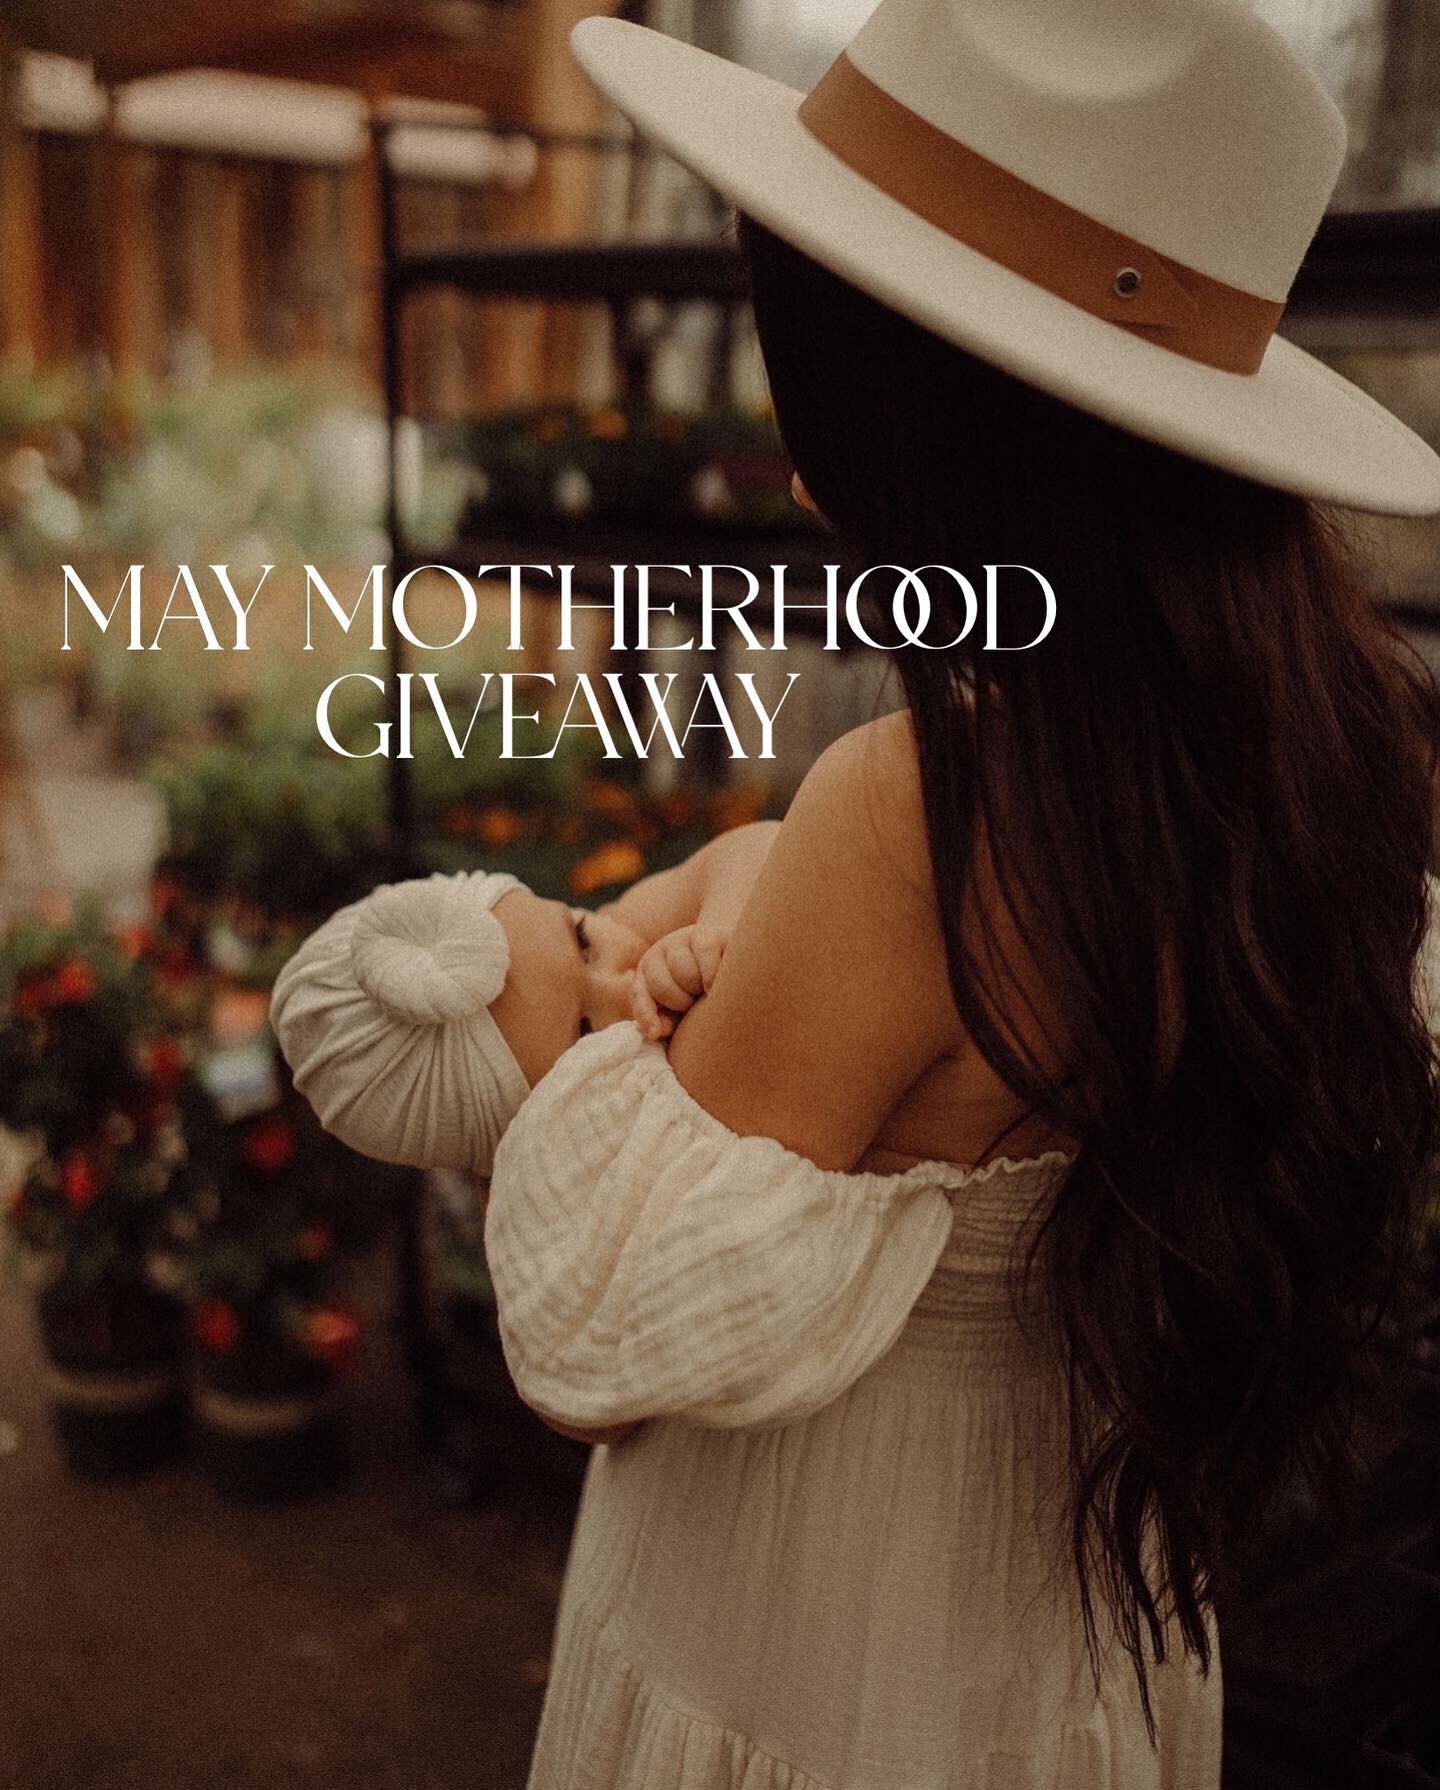 In celebration of the month we celebrate motherhood I wanted to give one lucky mama the chance to spoil herself or someone else with a FREE local 30 minute session with their little(s) OR soon to be mama. This session will take place this month!
.
.
